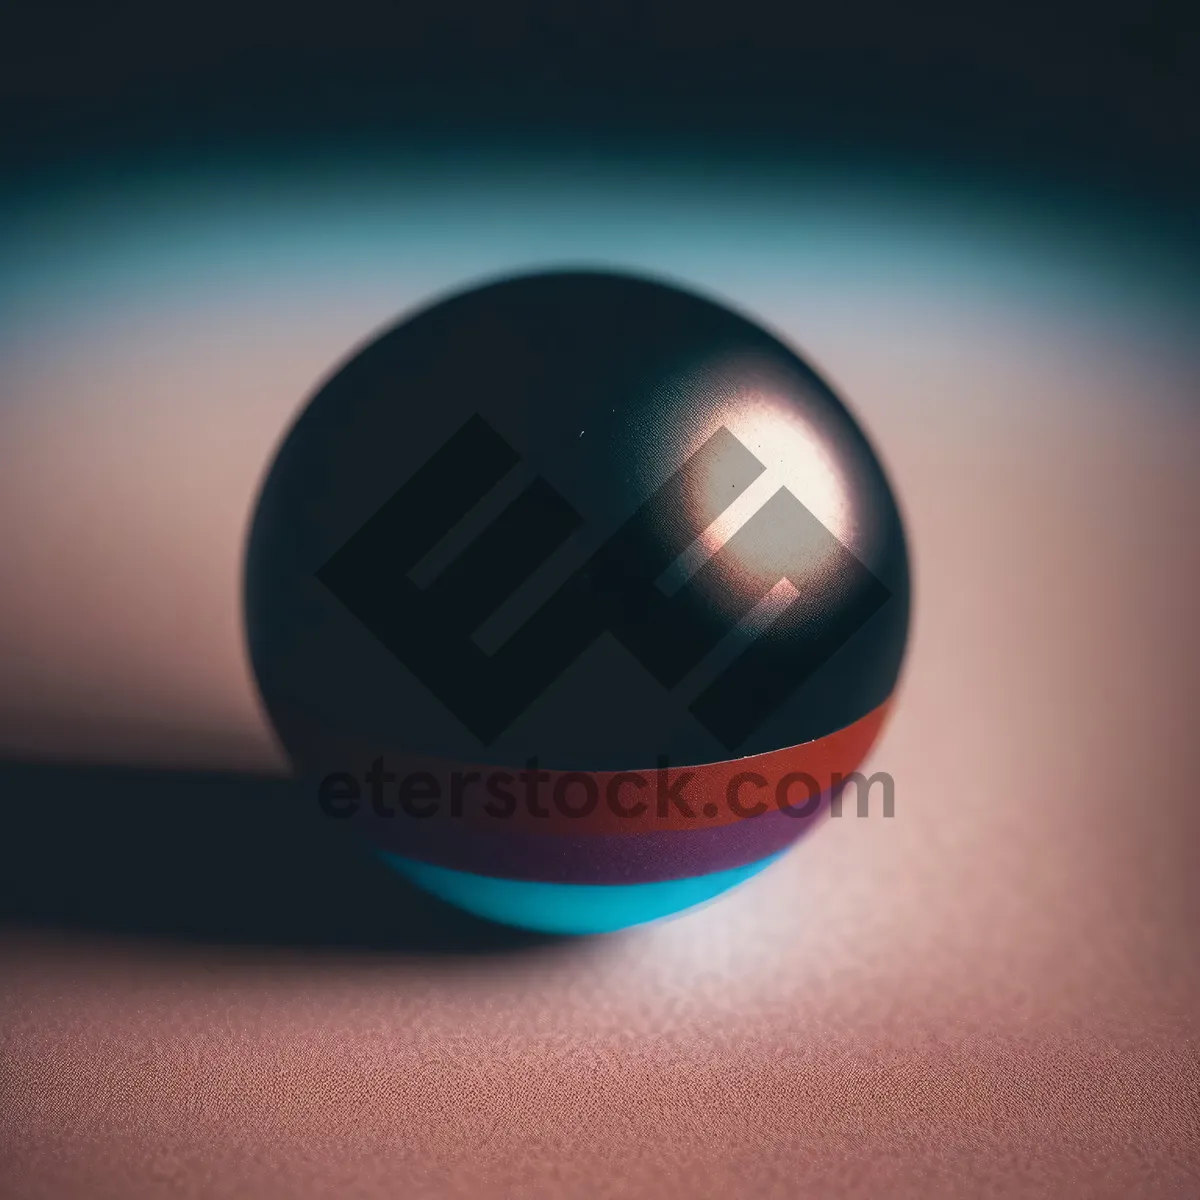 Picture of Round Electronic Device on Pool Table